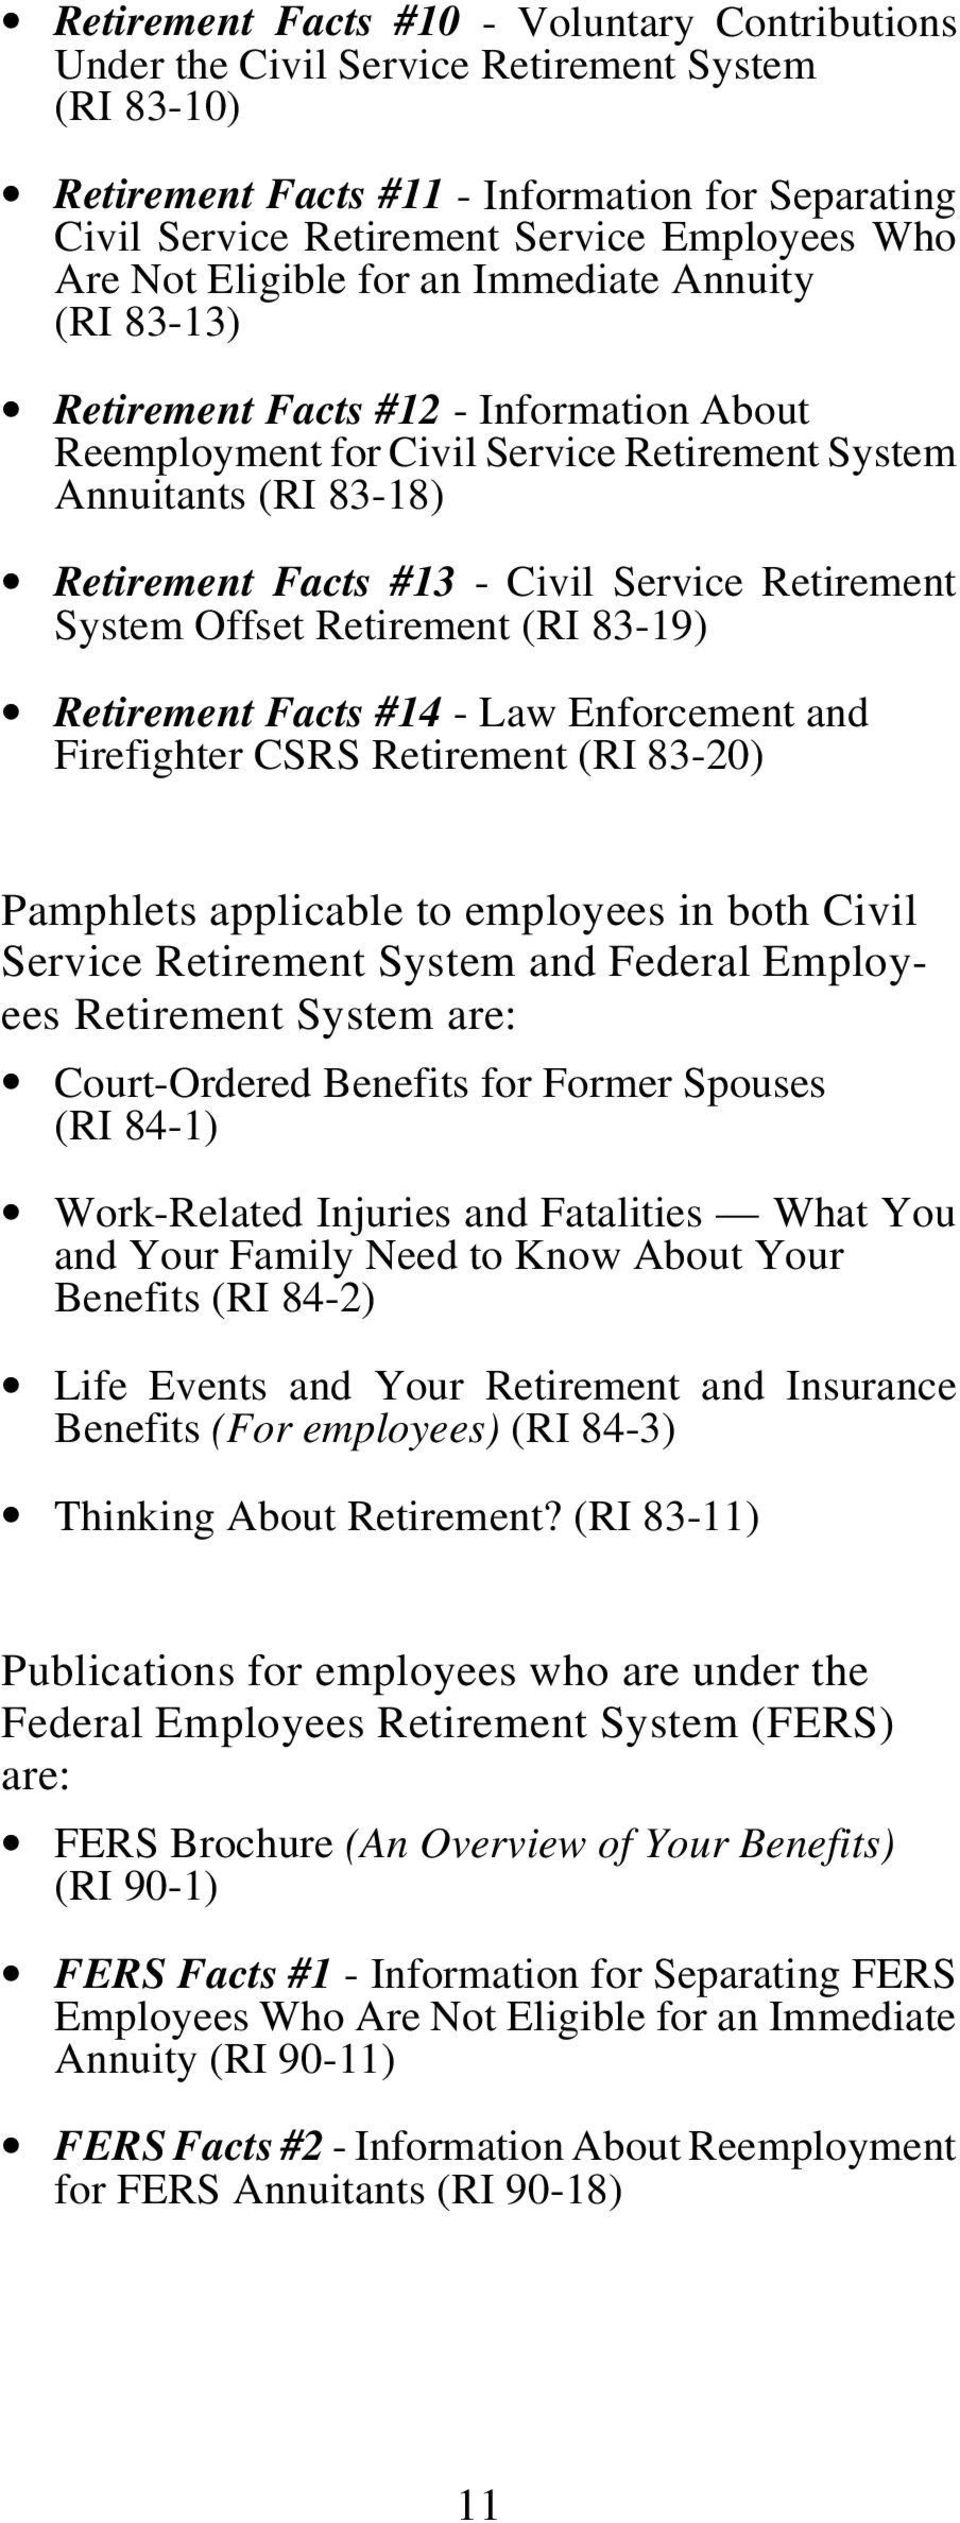 Service Retirement System Offset Retirement (RI 83-19) Retirement Facts #14 - Law Enforcement and Firefighter CSRS Retirement (RI 83-20) Pamphlets applicable to employees in both Civil Service